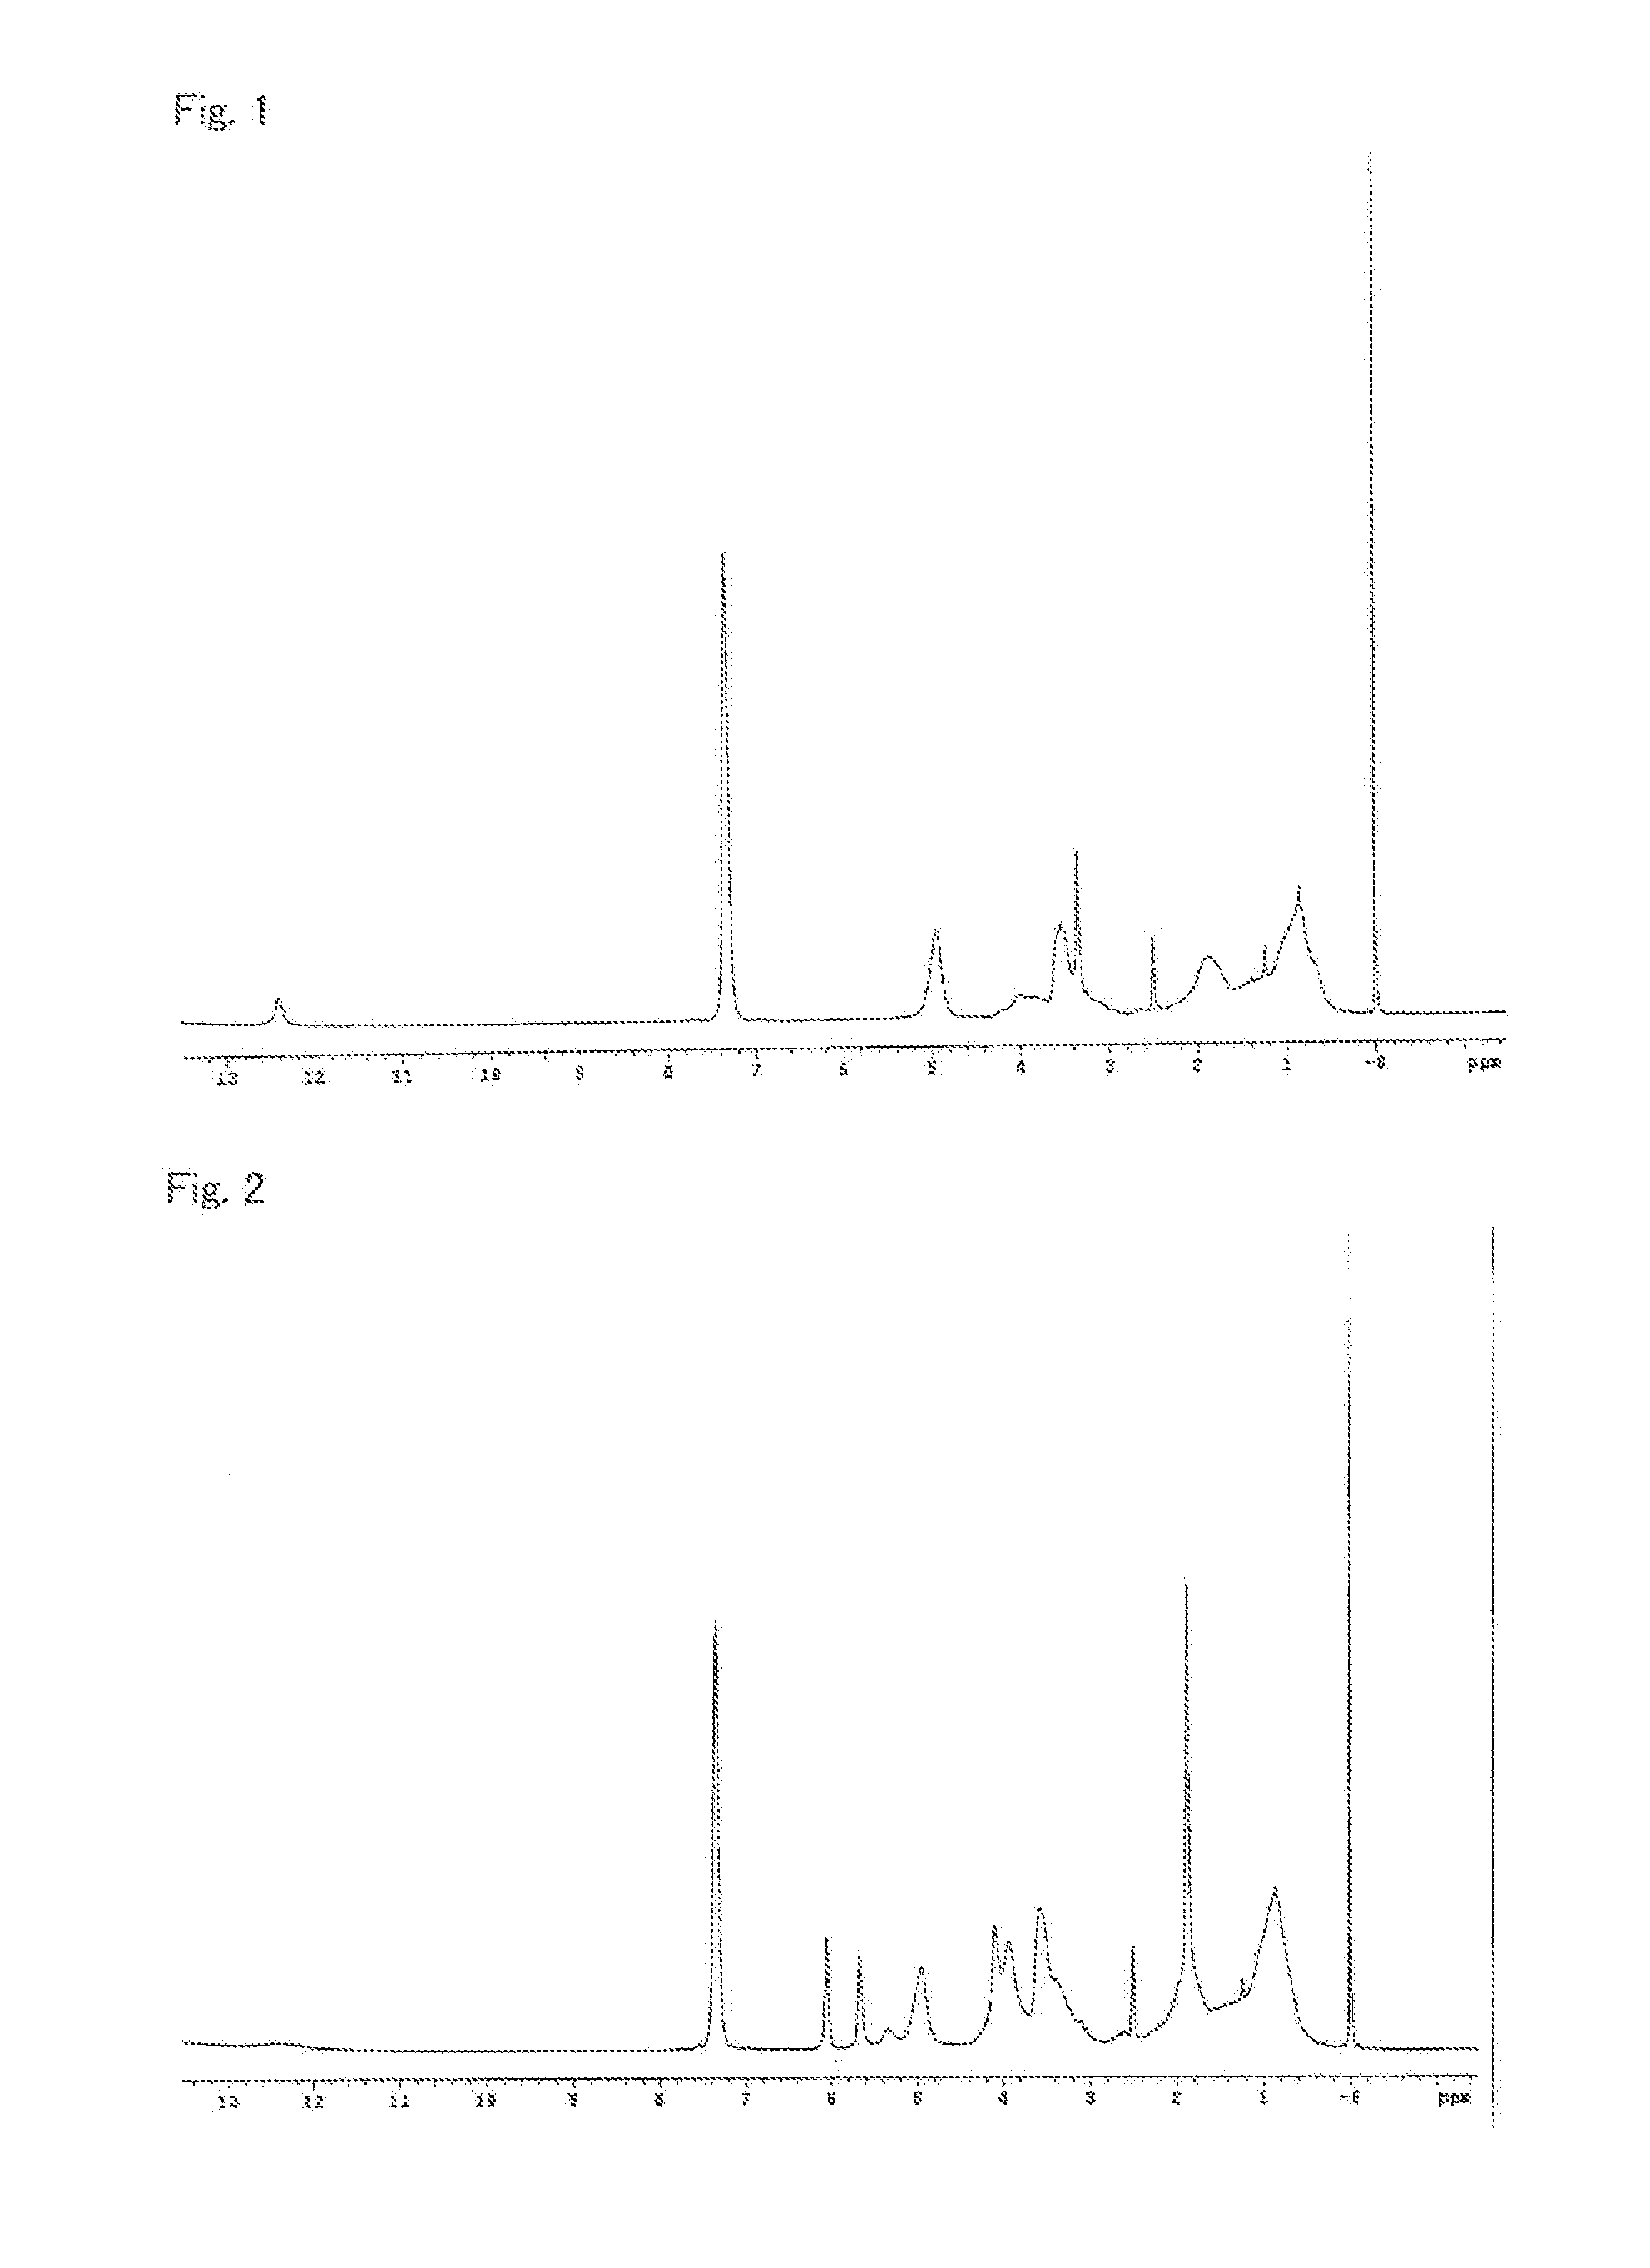 Alpha-allyloxymethylacrylic acid-based copolymer, resin compositions, and use thereof